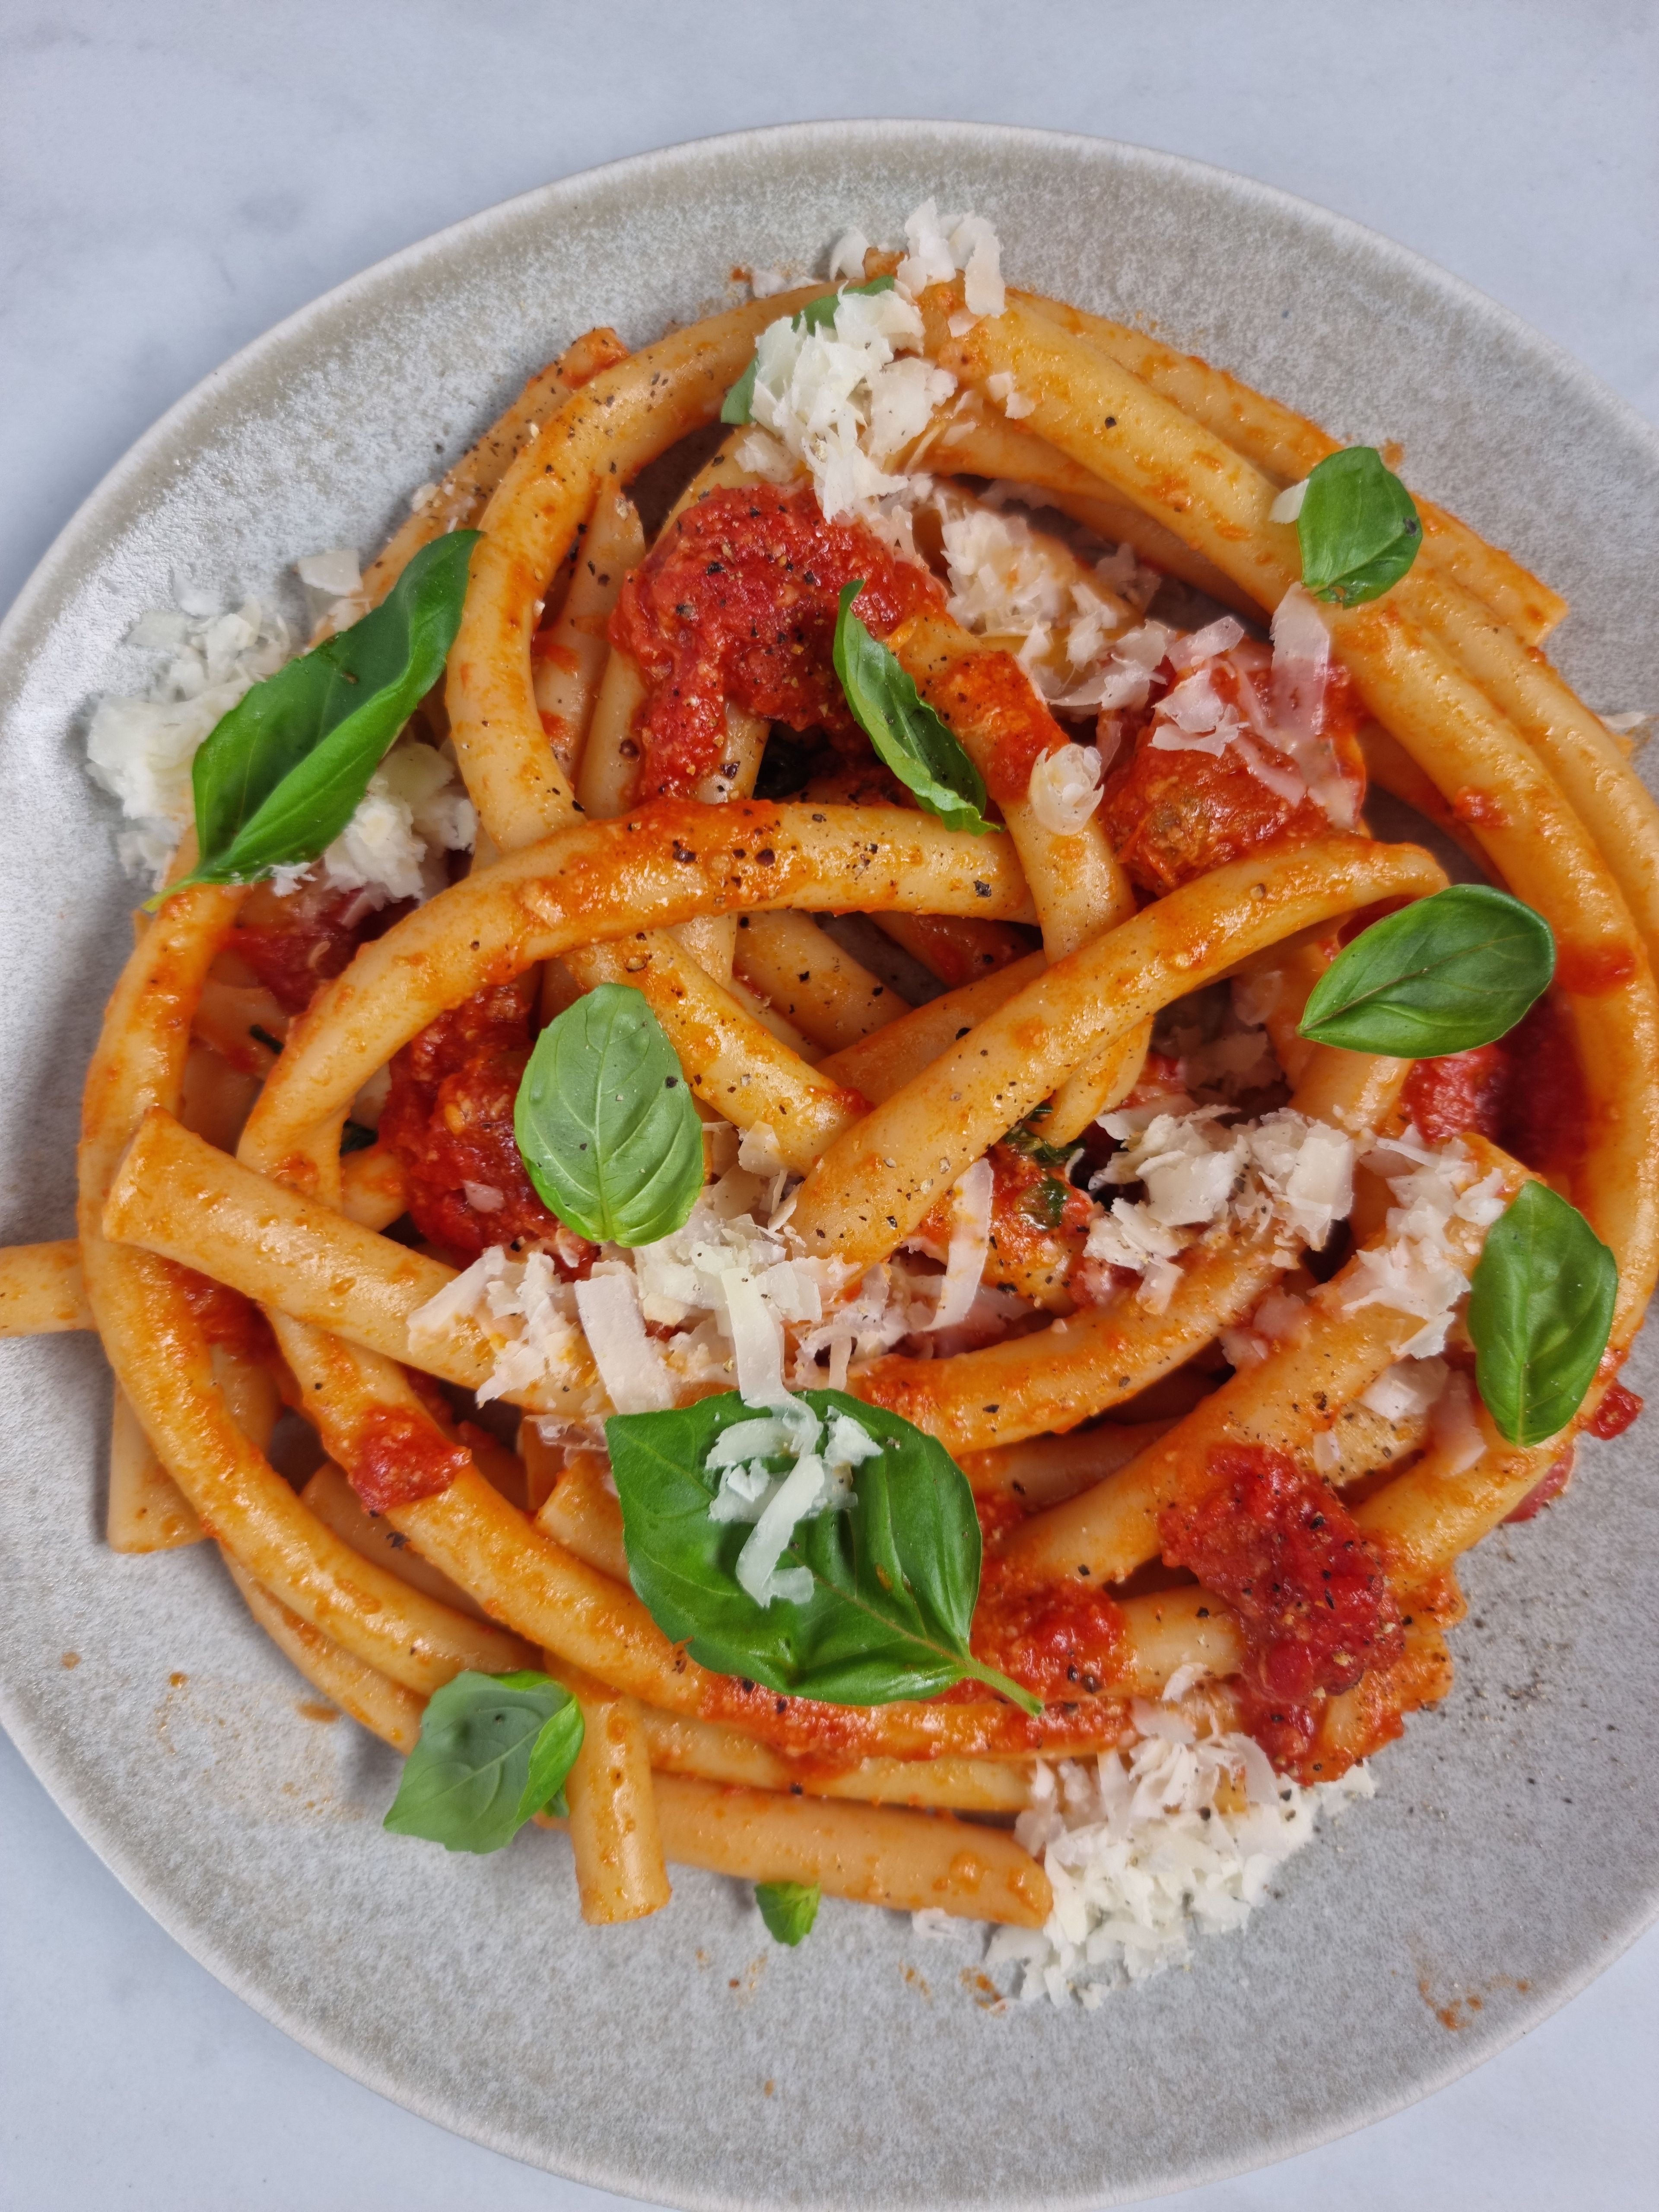 Season the sauce with salt and pepper. Drain the pasta and combine with the sauce in the pan. Stir half of the Parmesan cheese into the pasta. Plate and garnish with remaining Parmesan and more basil. Enjoy!